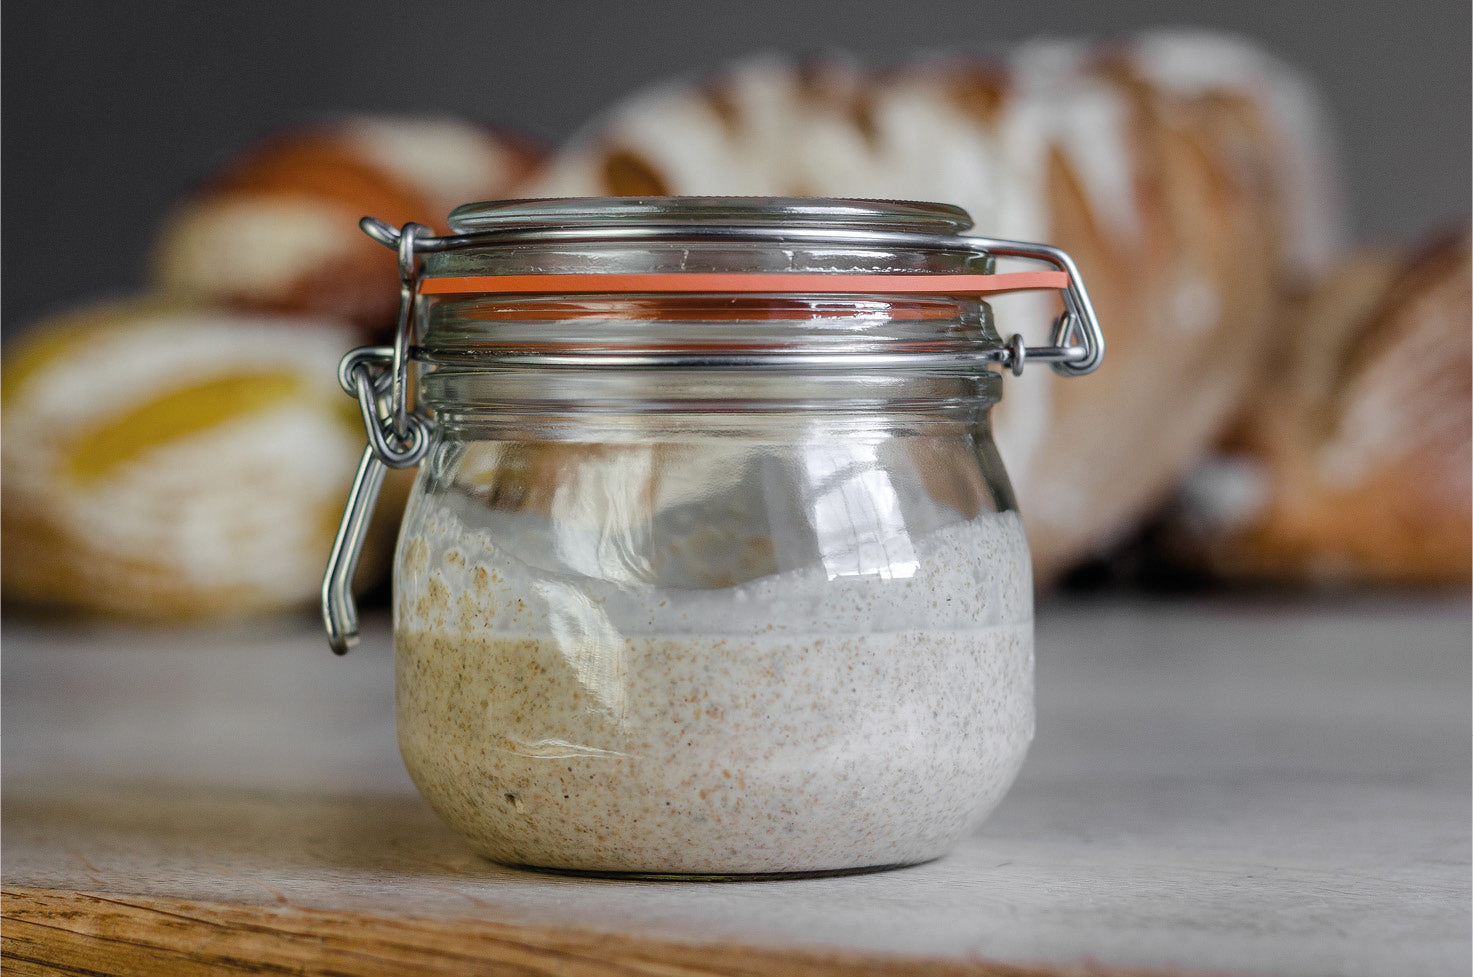 Make the Most of your Sourdough with Henry Herbert